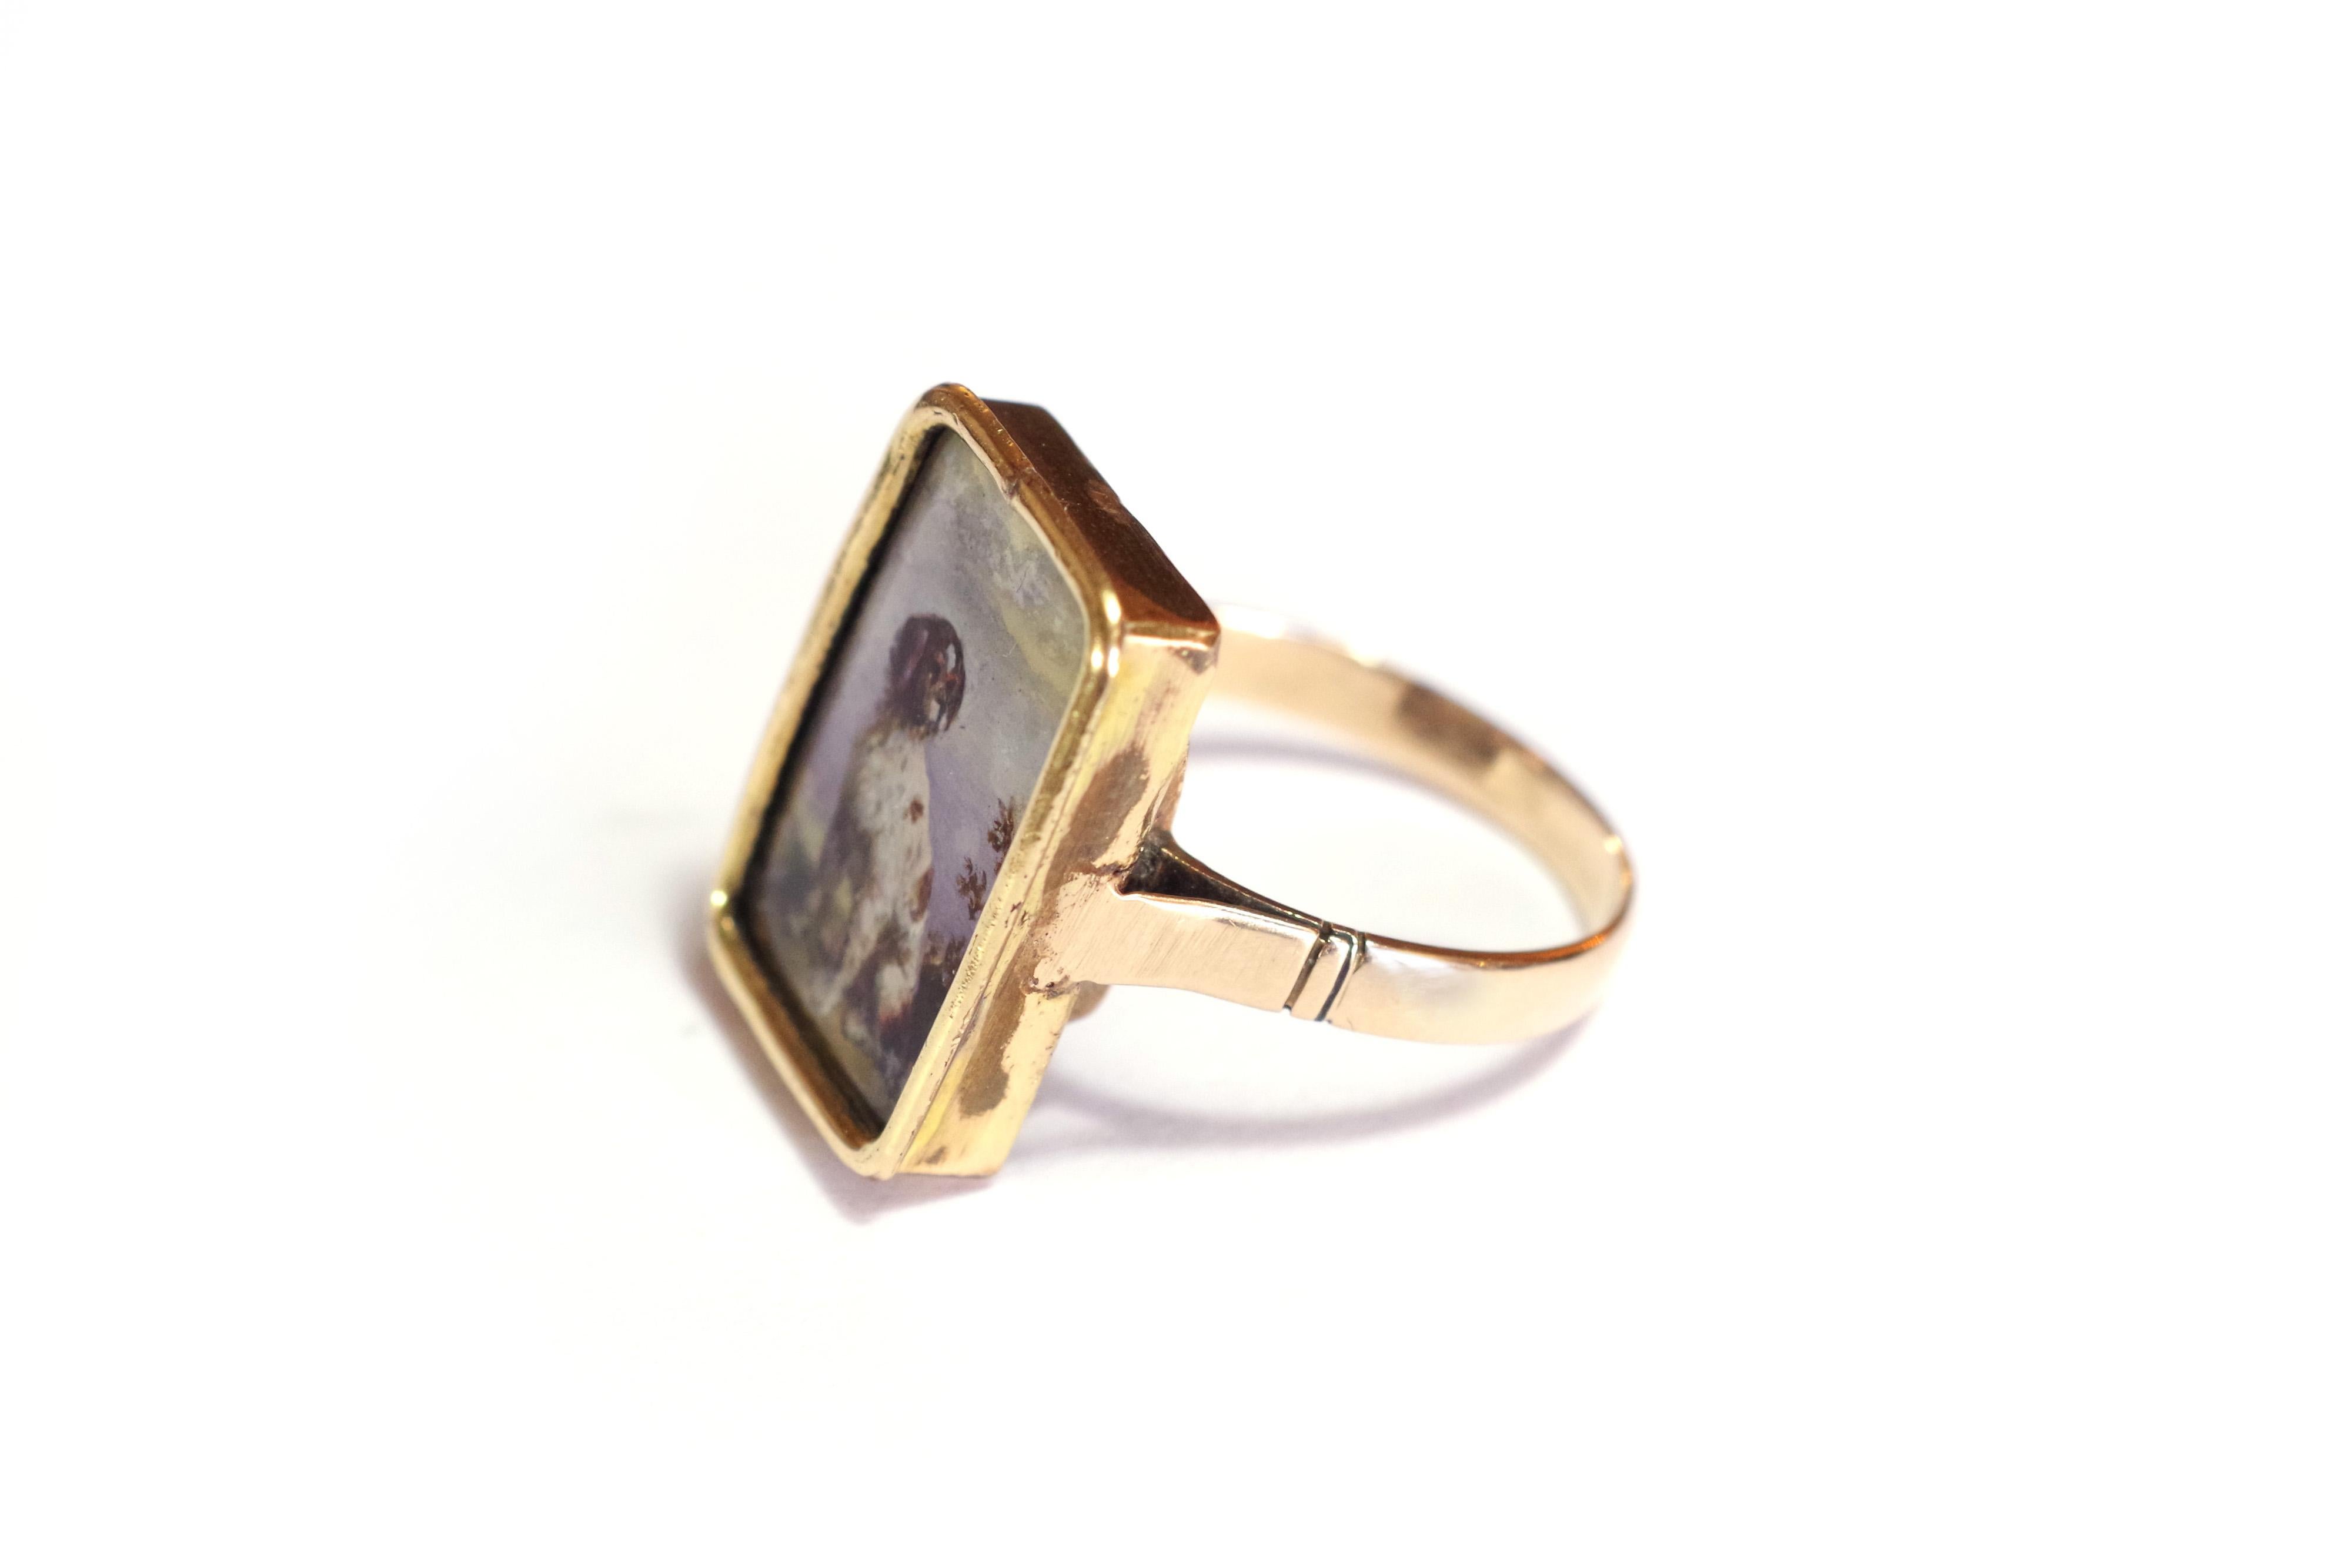 Victorian Spaniel brittany dog ring in rose gold 9 karats. Antique ring with a painted miniature, showing a sitted dog, looking to the right. It is most probably a hunting dog, Spaniel Brittany type. The miniature is painted on a white background.